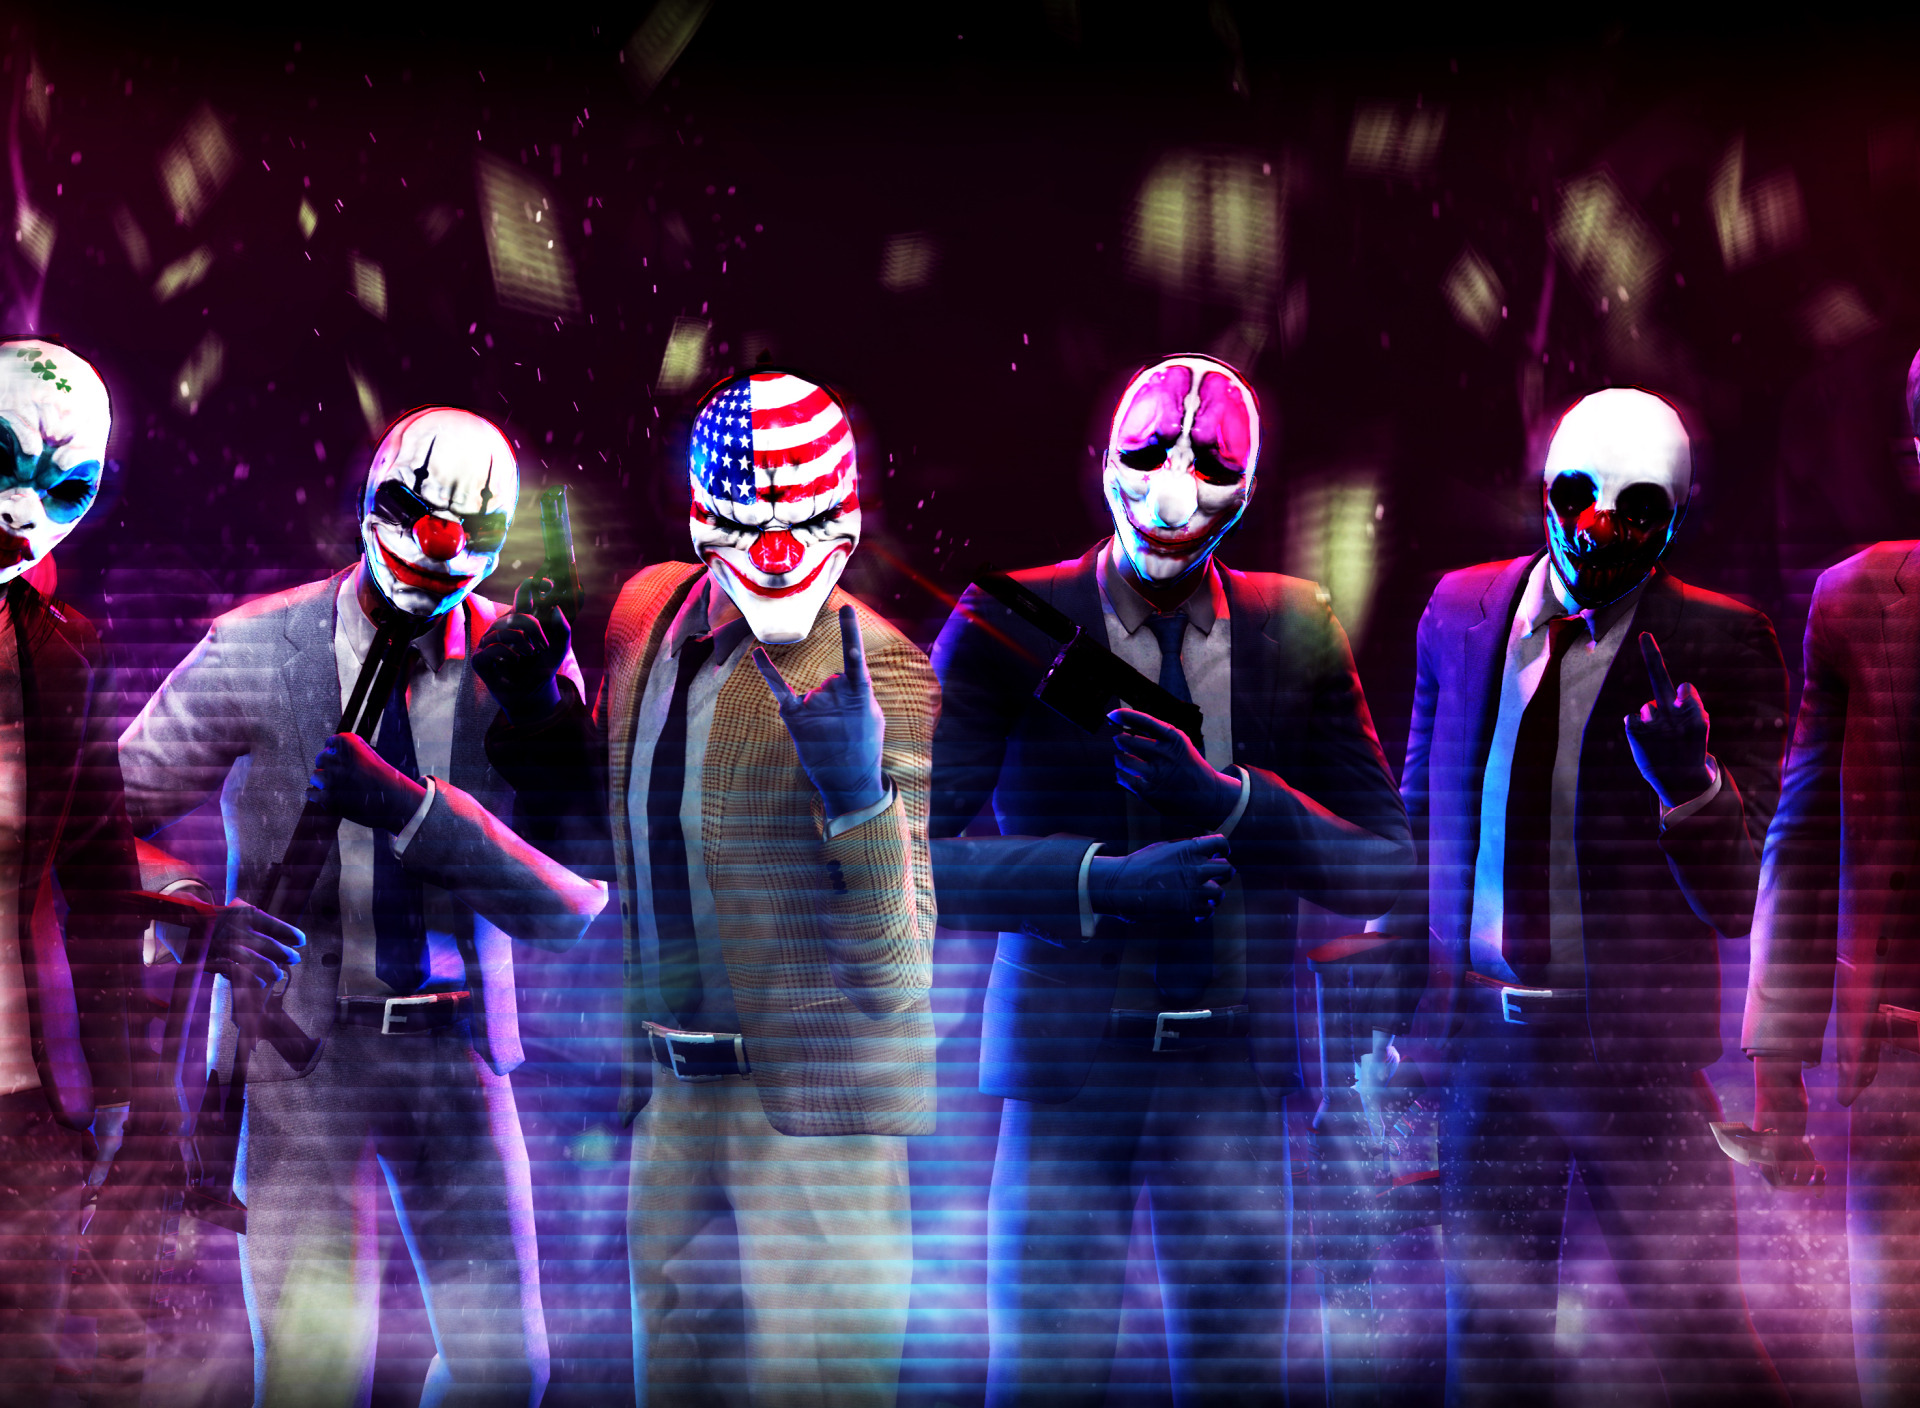 P3d hack for payday 2 фото 22